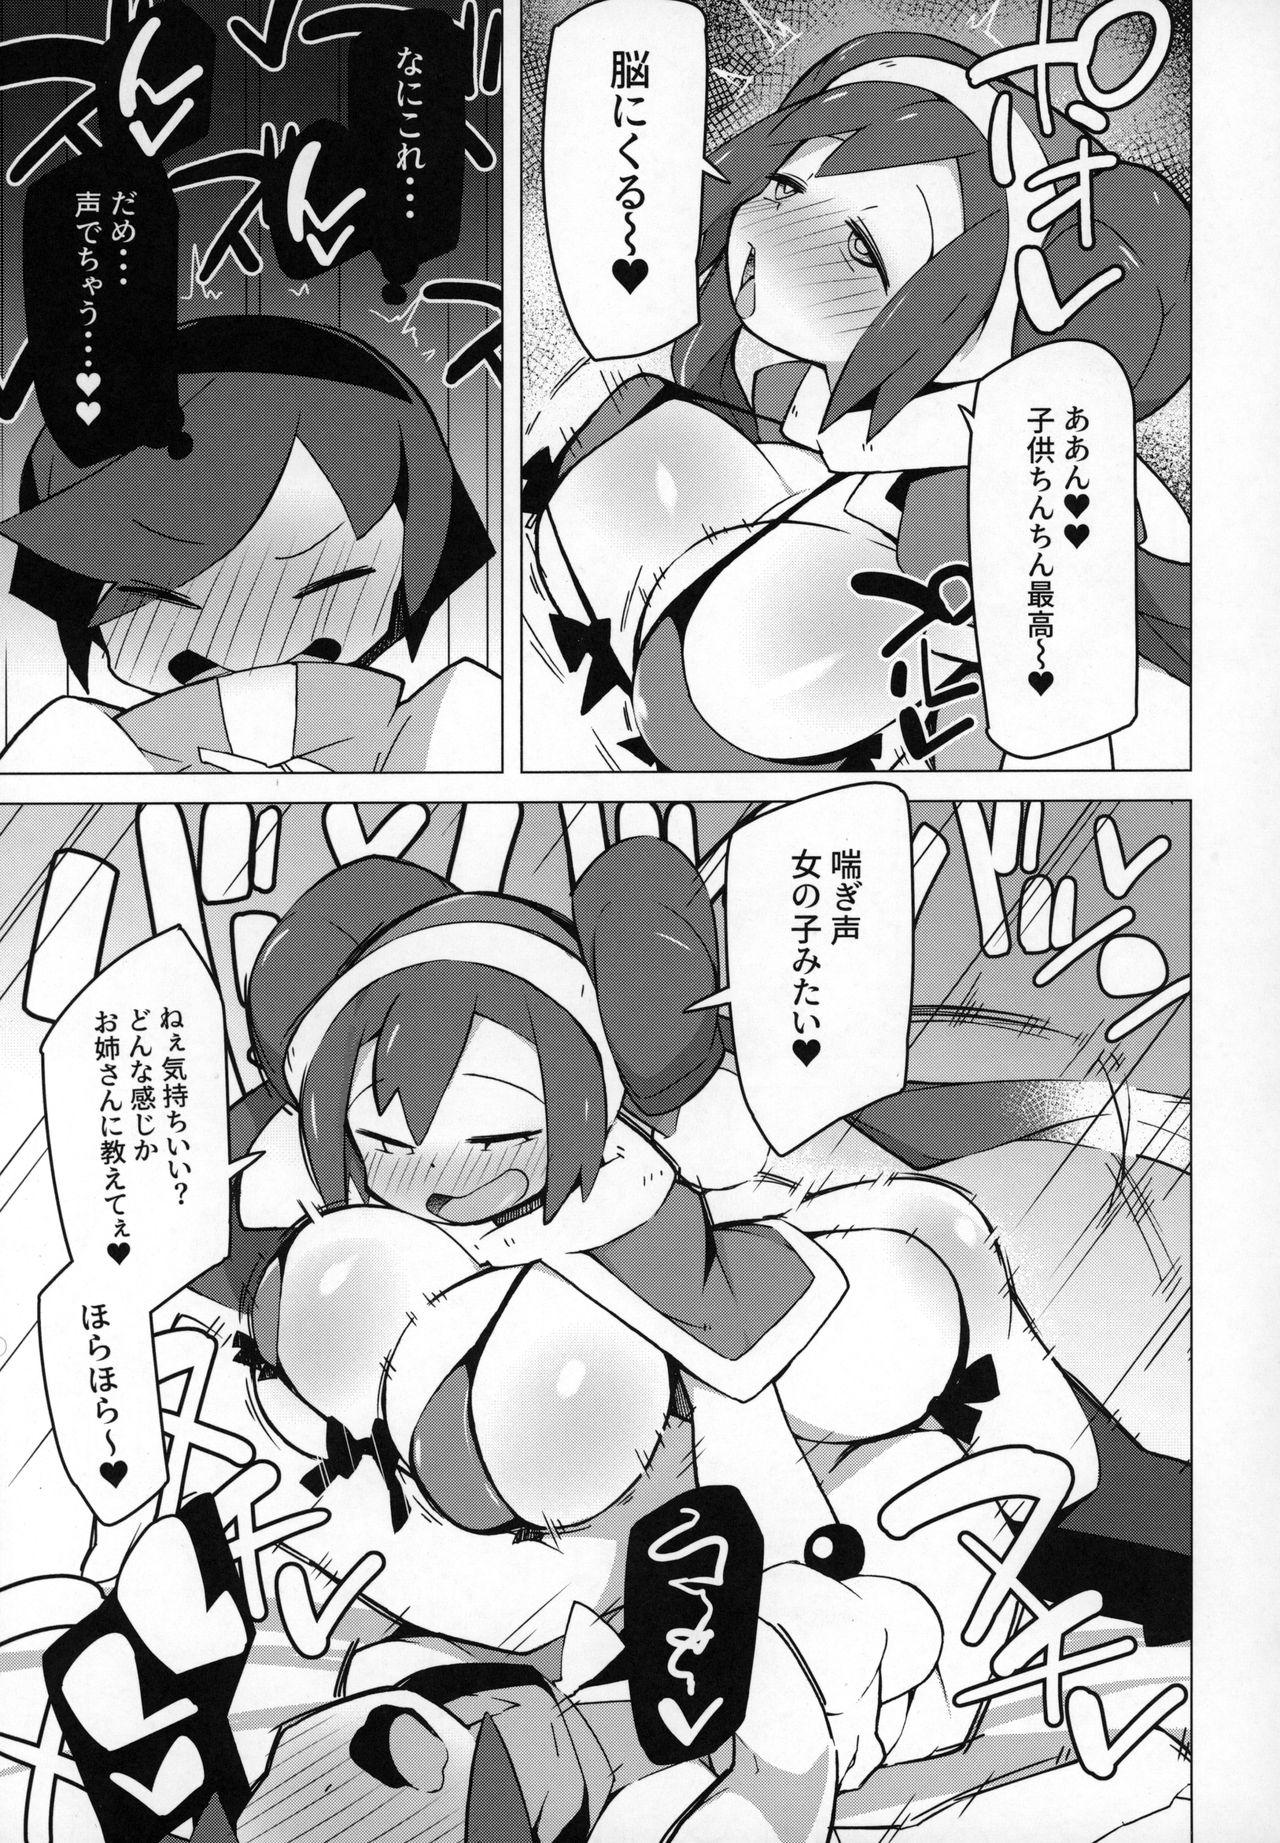 Ass Fetish Marushii 2 - Pokemon Breasts - Page 8